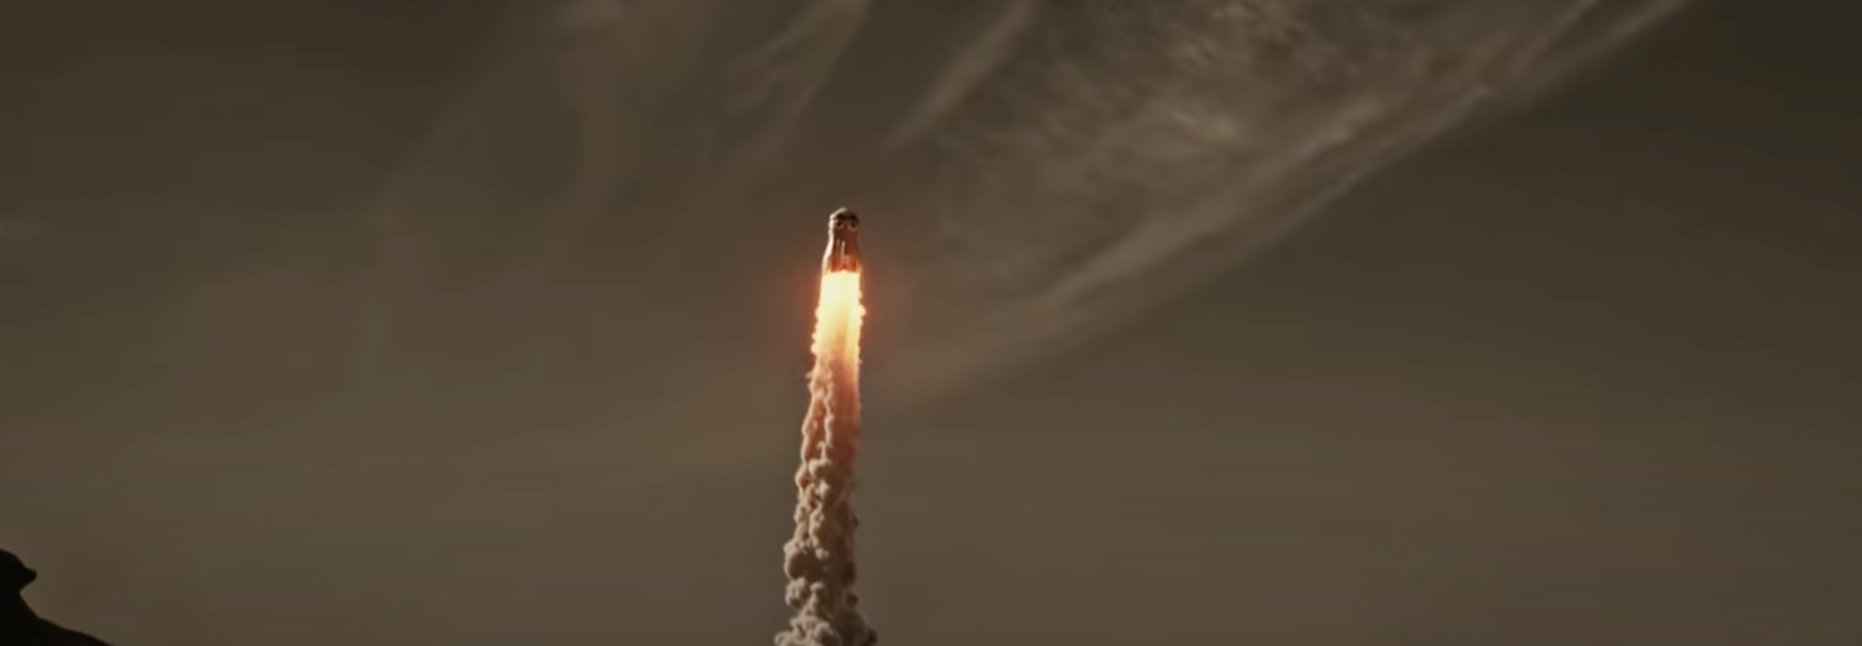 A spaceship shoots up into the atmosphere on Mars